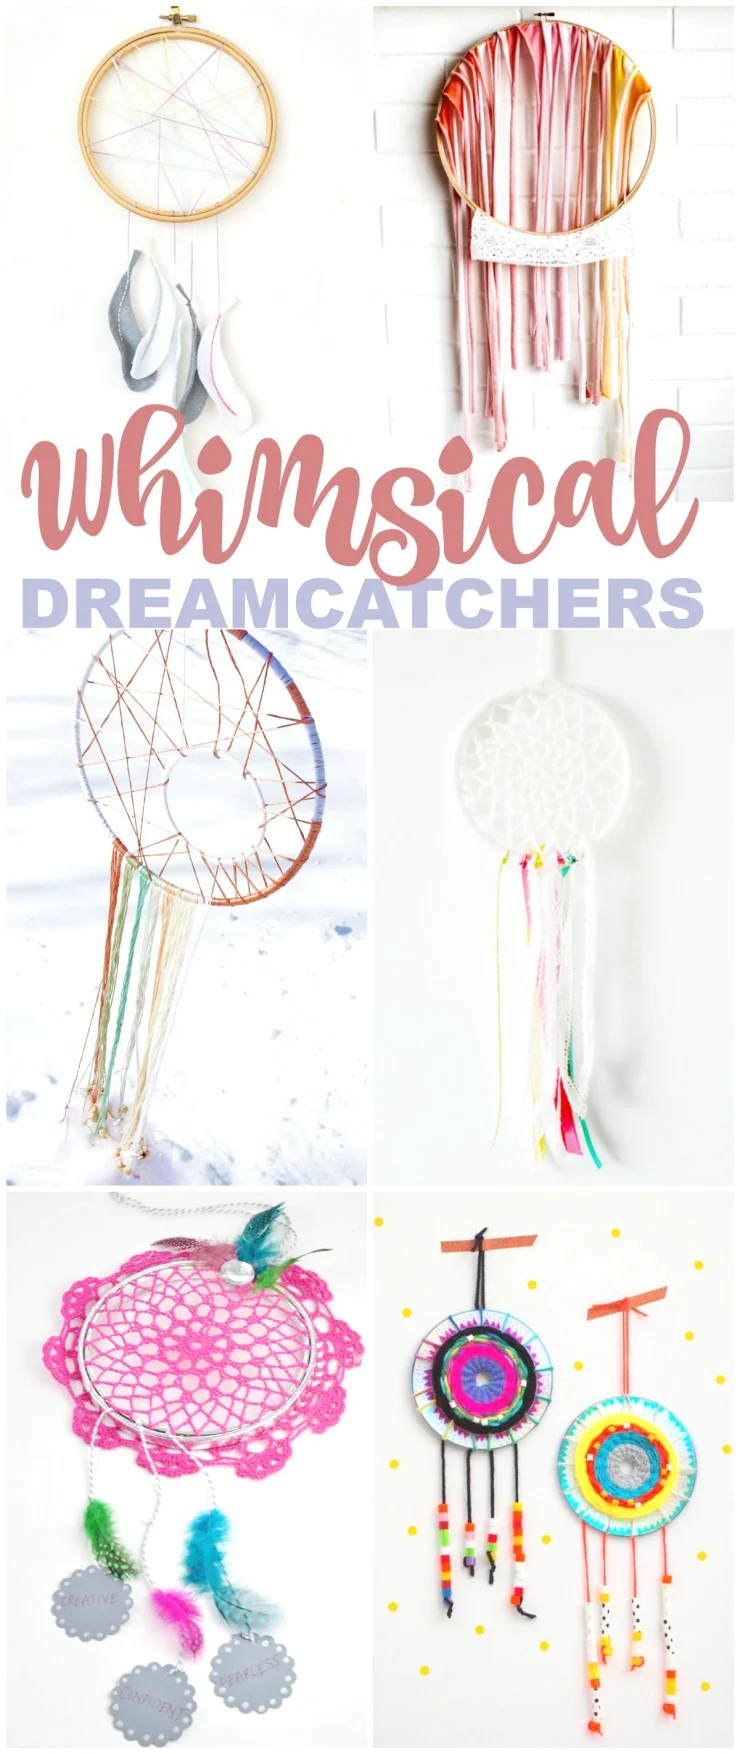 These 20 Whimsical DIY Dreamcatchers are gorgeous! They make for gorgeous wall décor or craft with kids to help them keep nightmares at bay.